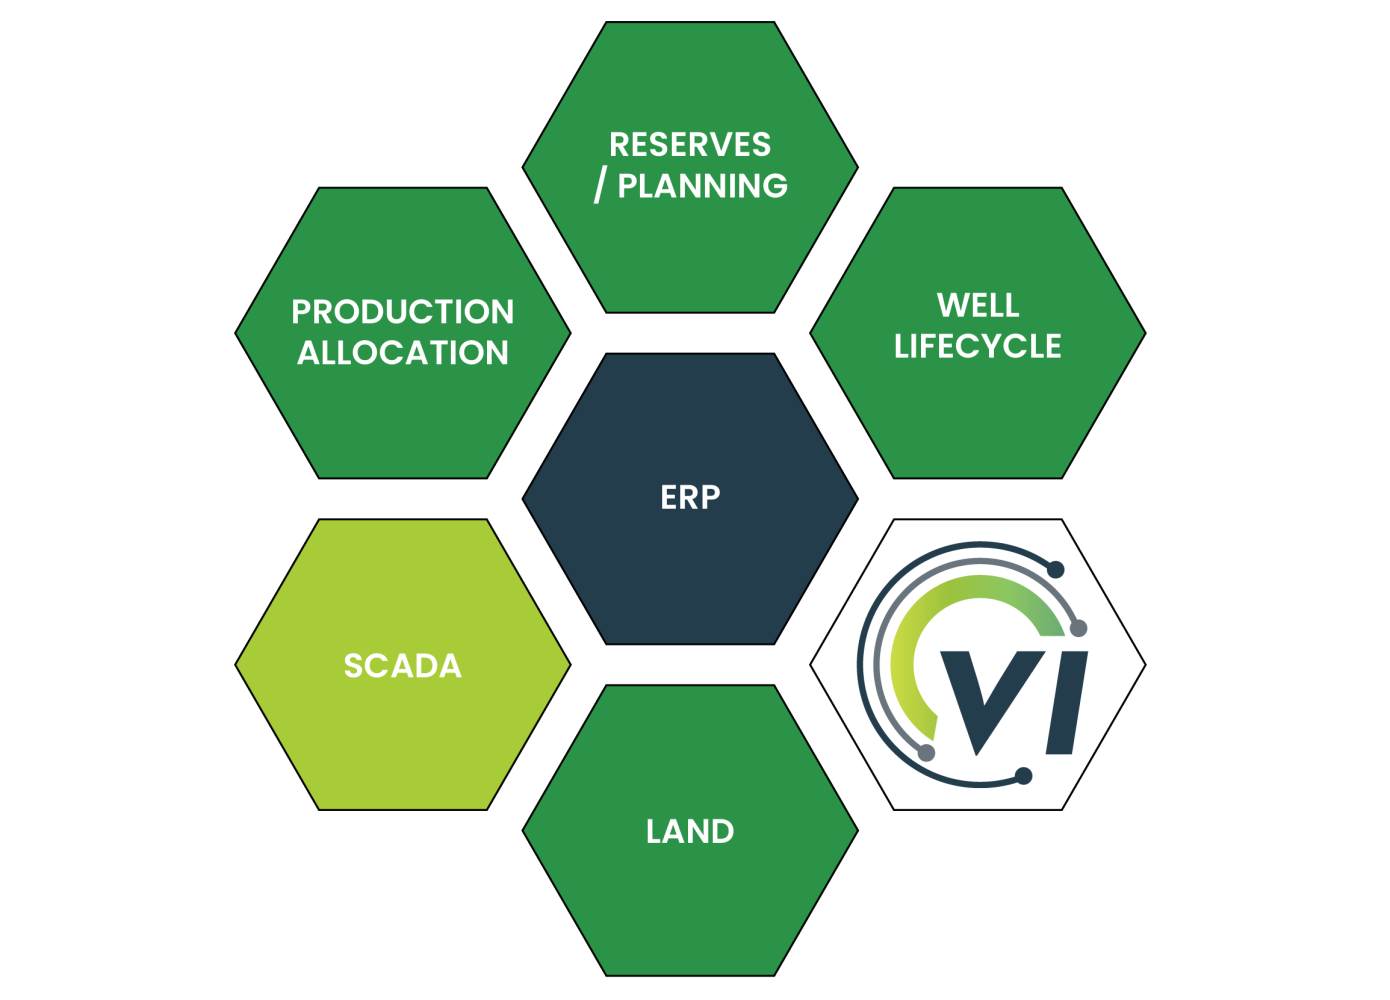 a visual representation of the "big six" software categories: SCADA, ERP, reserves/planning, well lifecycle, production allocation, and land